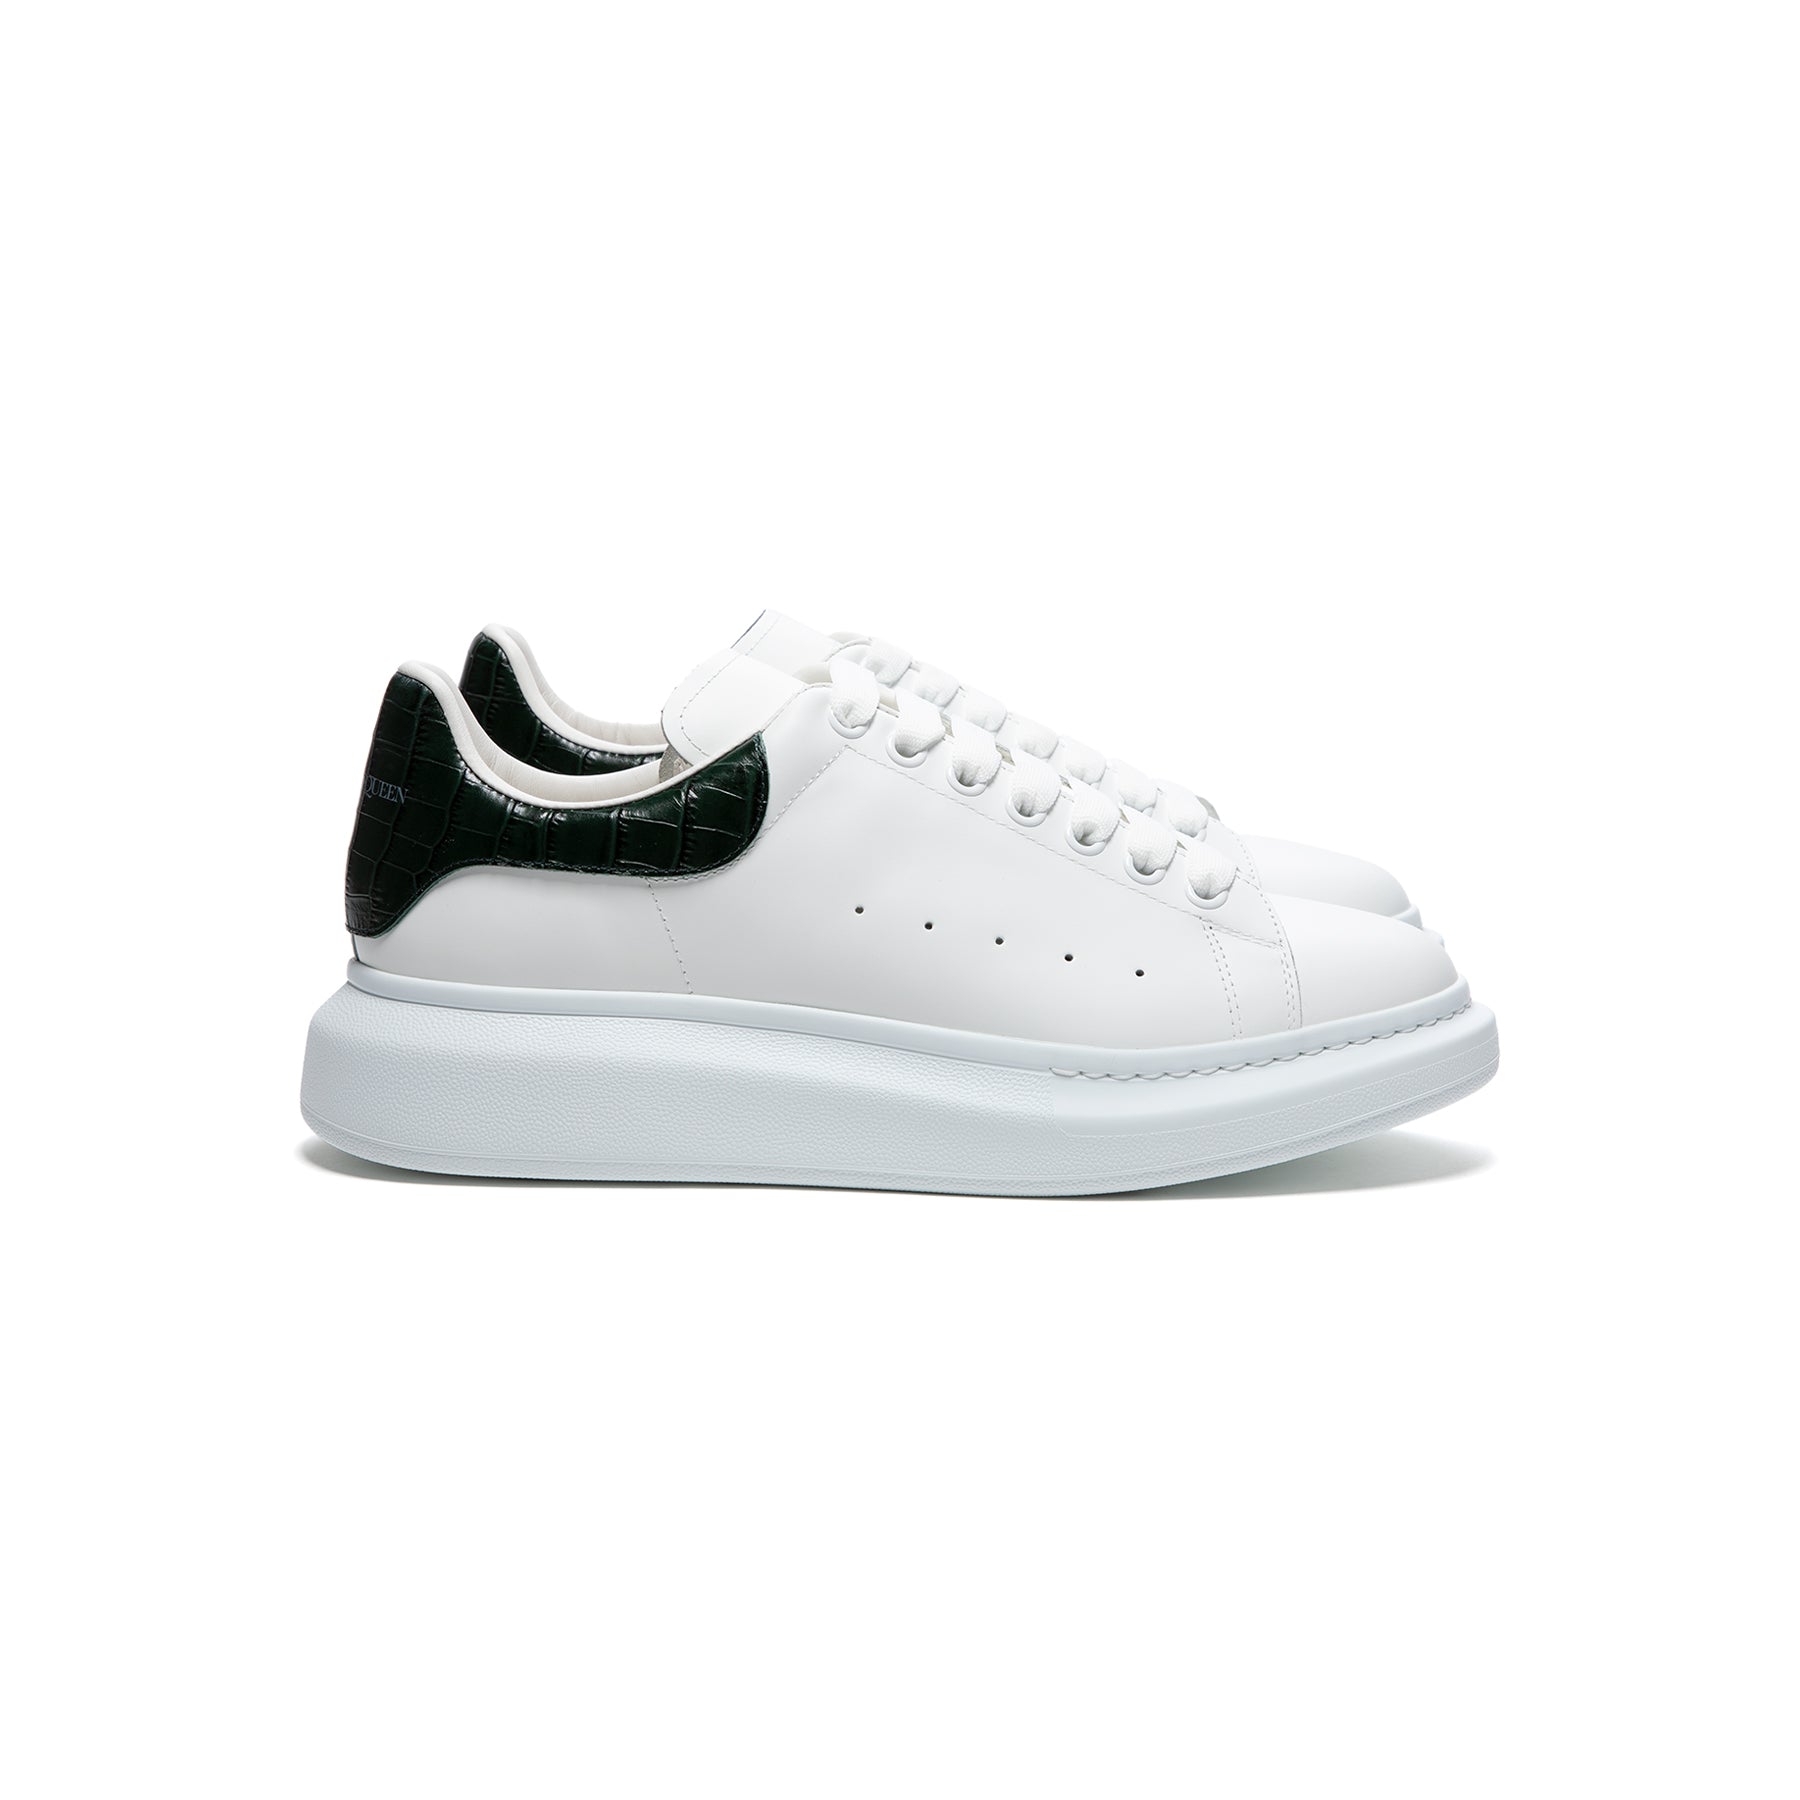 Alexander McQueen Oversized White And Black Sneakers New